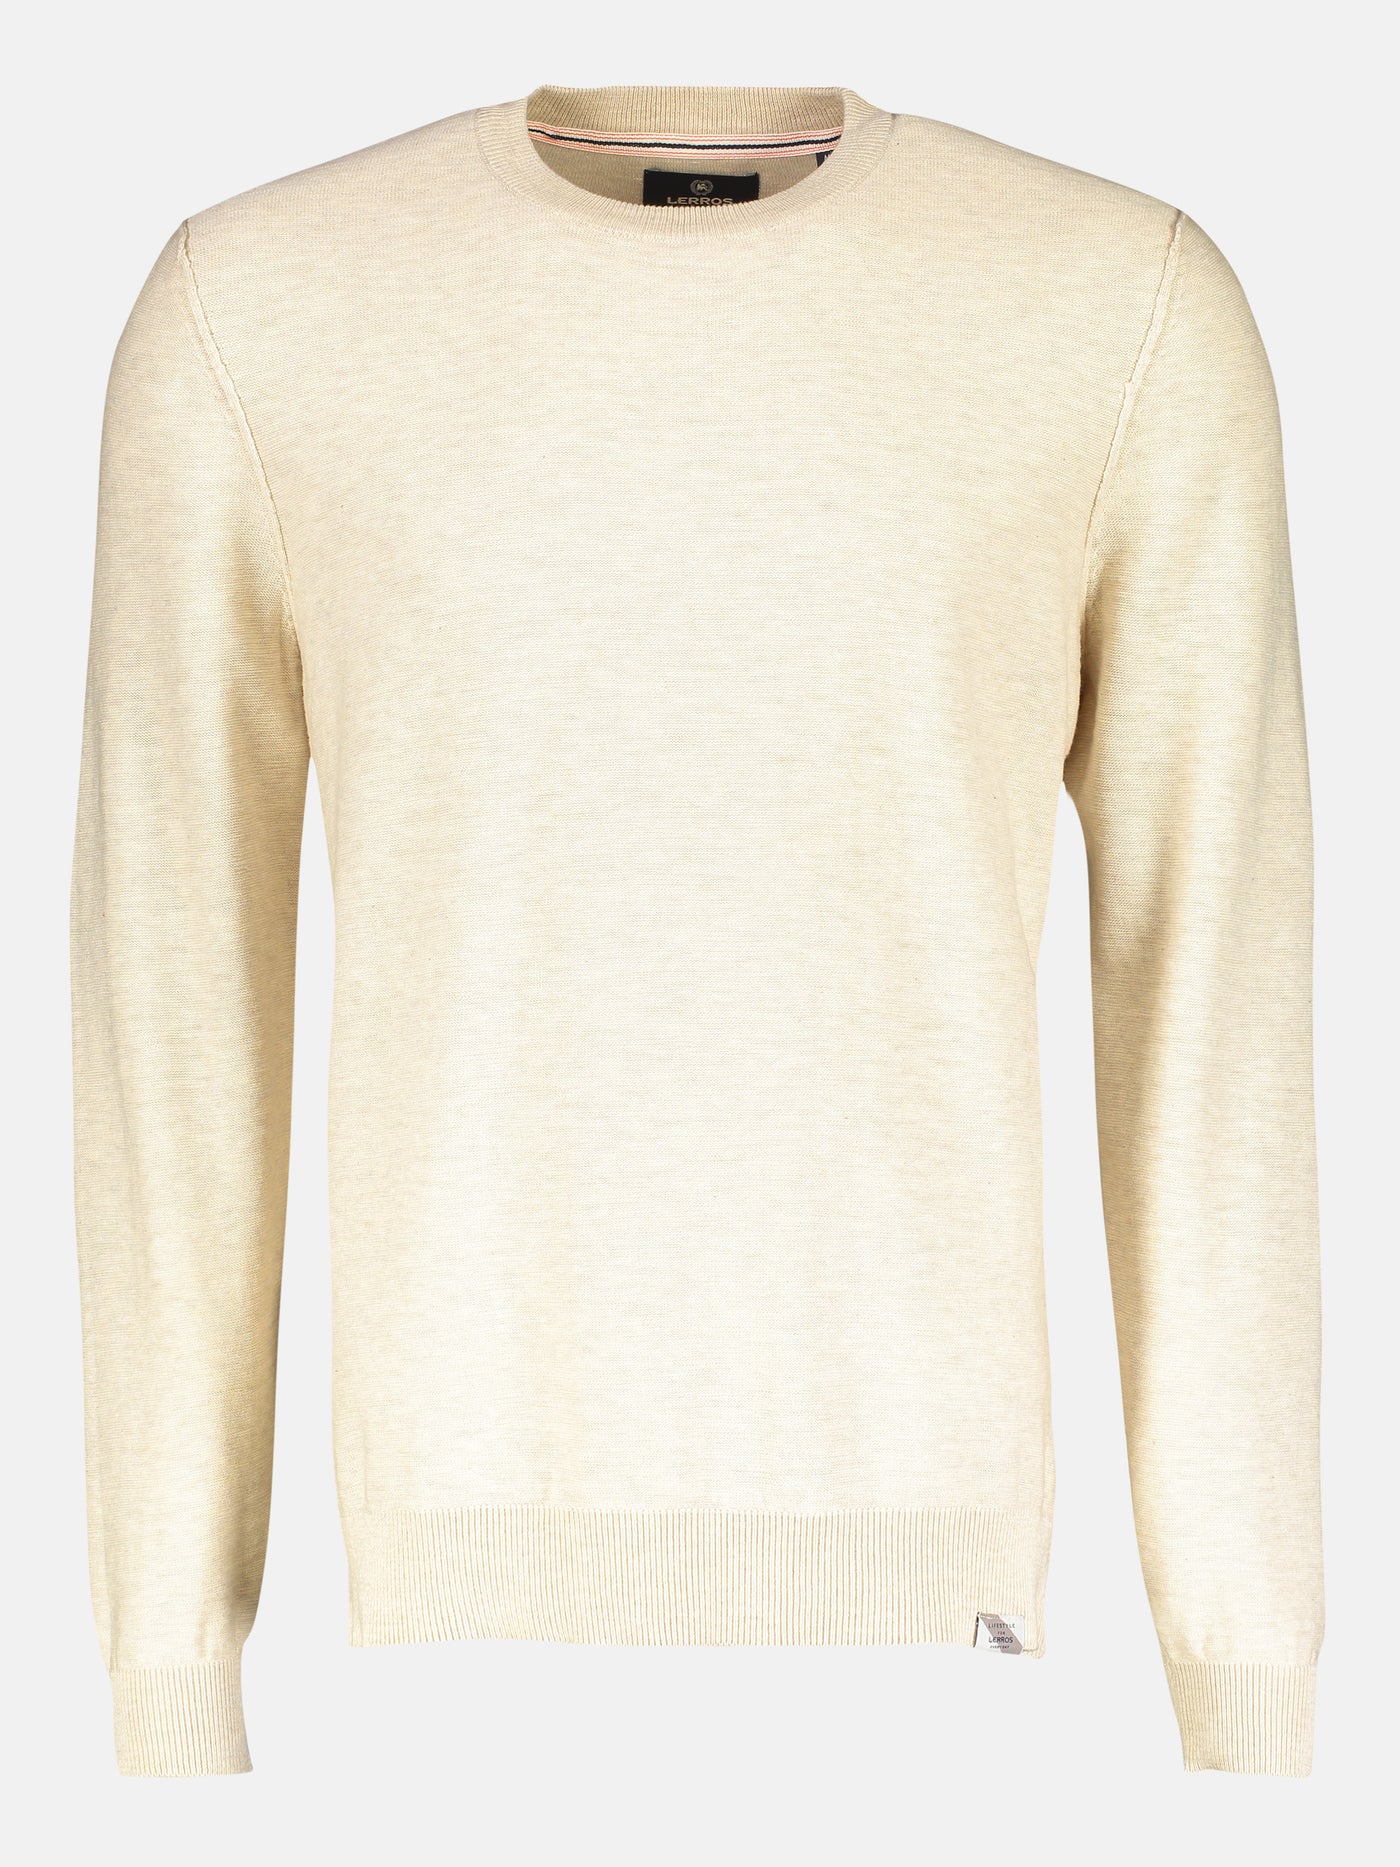 Knit sweater, sustainably produced